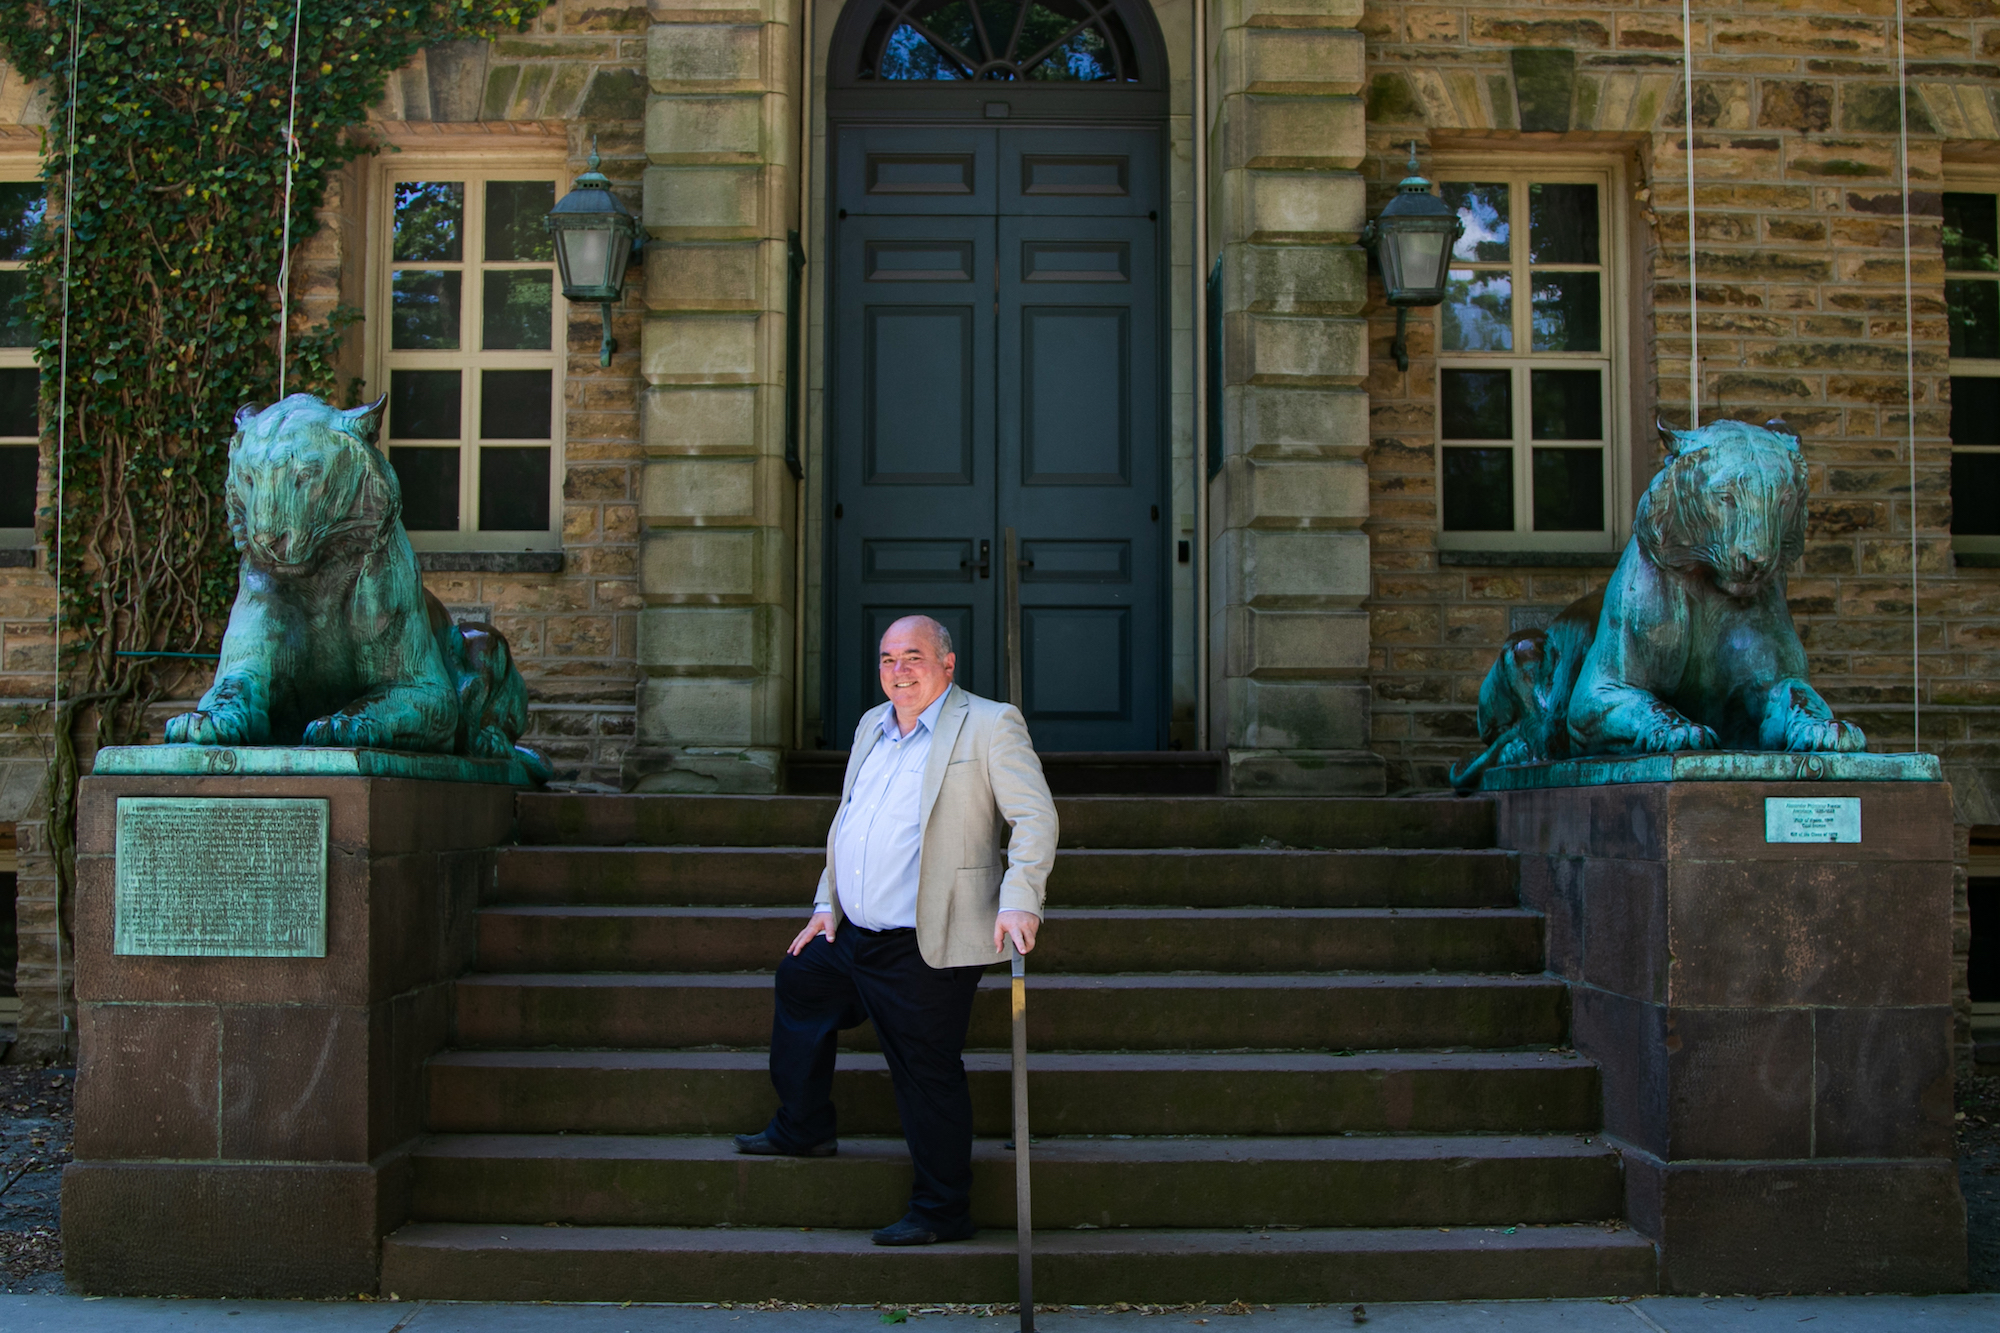 The founder of Network for Teaching Entrepreneurship (NFTE) Steve Mariotti stands on stairs in Princeton University in New Jersey on June 25, 2020. (Chung I Ho/The Epoch Times)